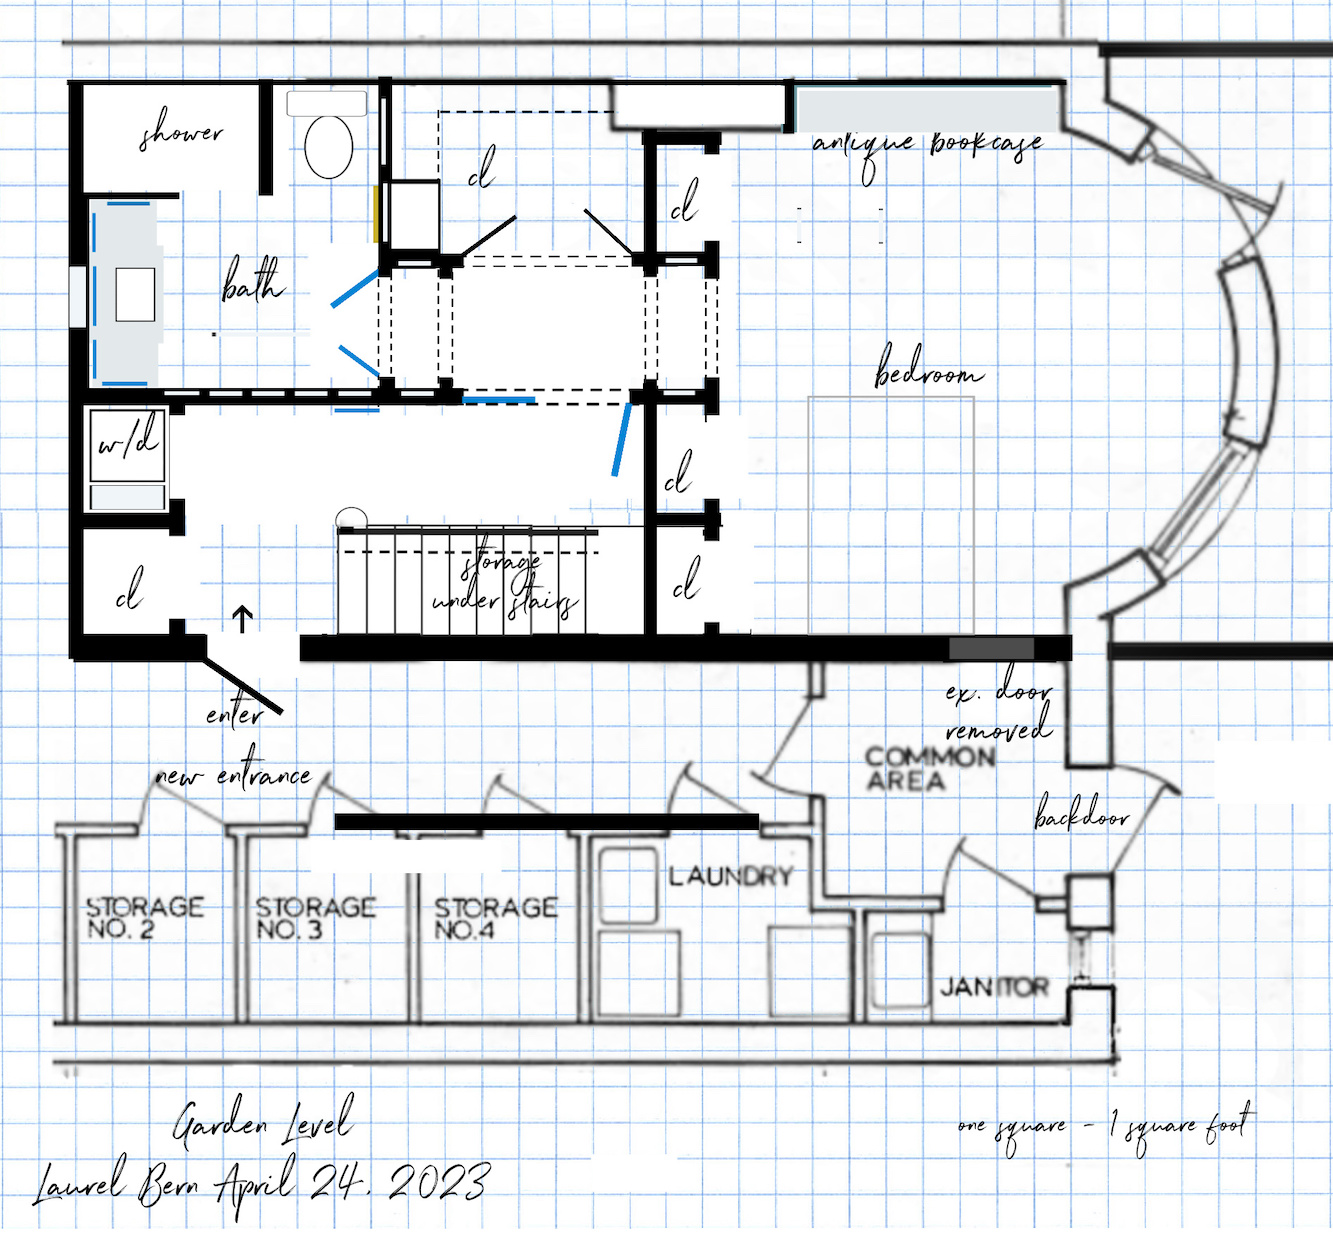 Straight run stairs Garden Level April 25, 2023 proposed plan bedroom suite - Furlowized - renovation countdown